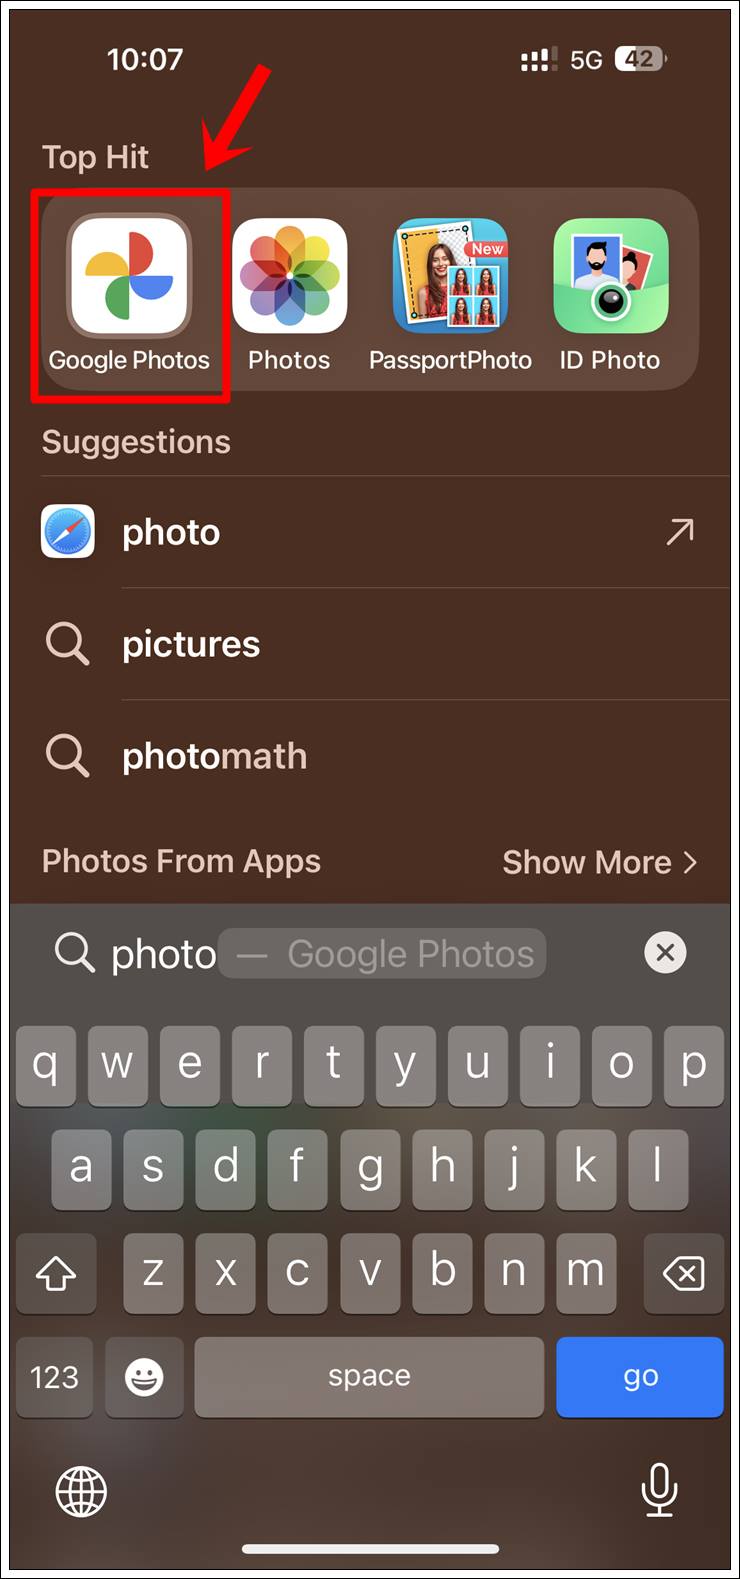 This is a screenshot from an iPhone with the 'Google Photos' icon highlighted.